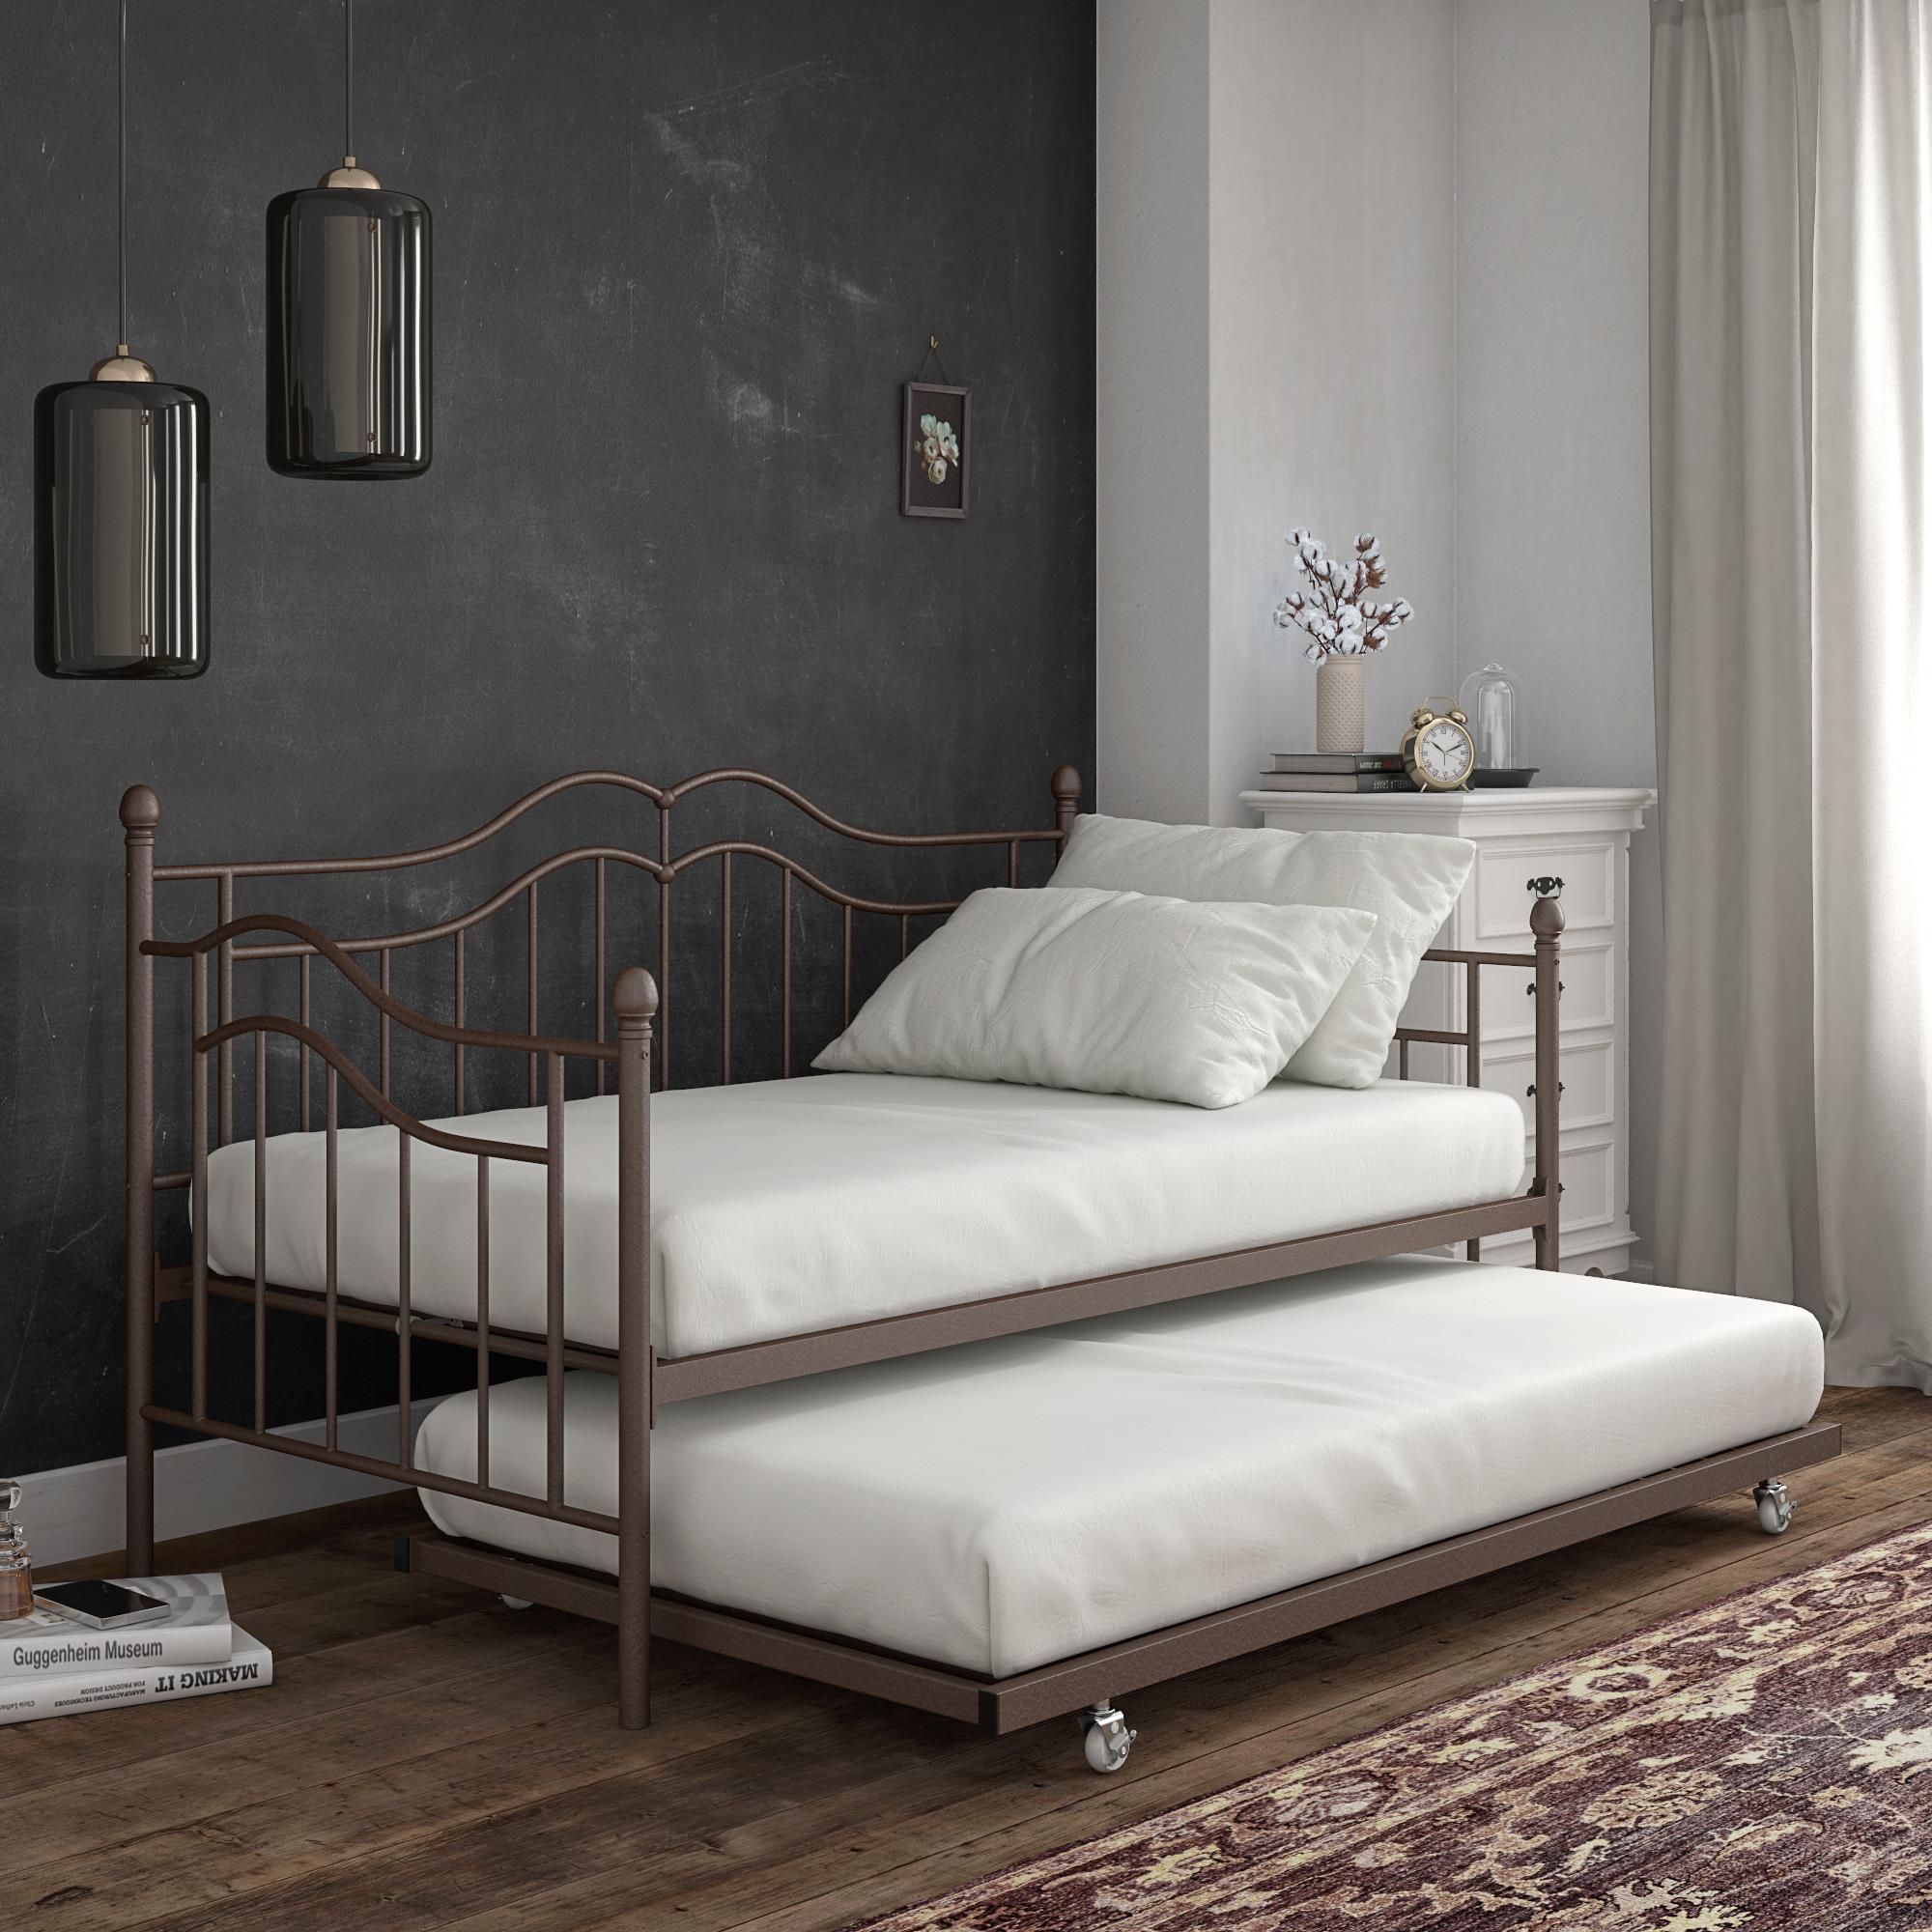 Desert Fields Tokyo Metal Daybed And Trundle, Twin/Twin Size Frame, Bronze - image 5 of 8